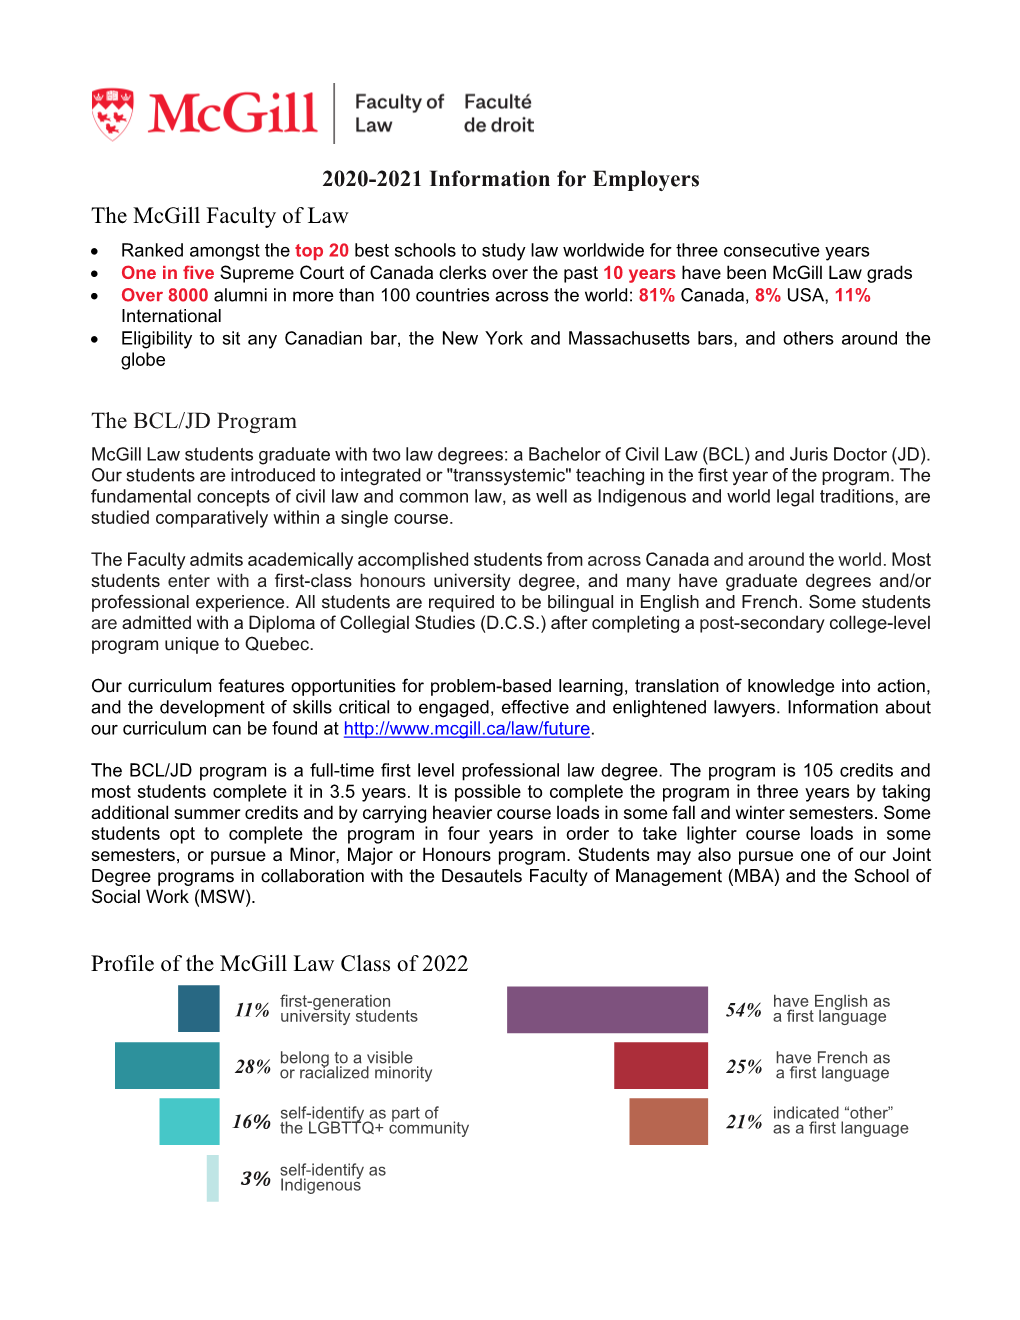 2020-2021 Information for Employers the Mcgill Faculty of Law the BCL